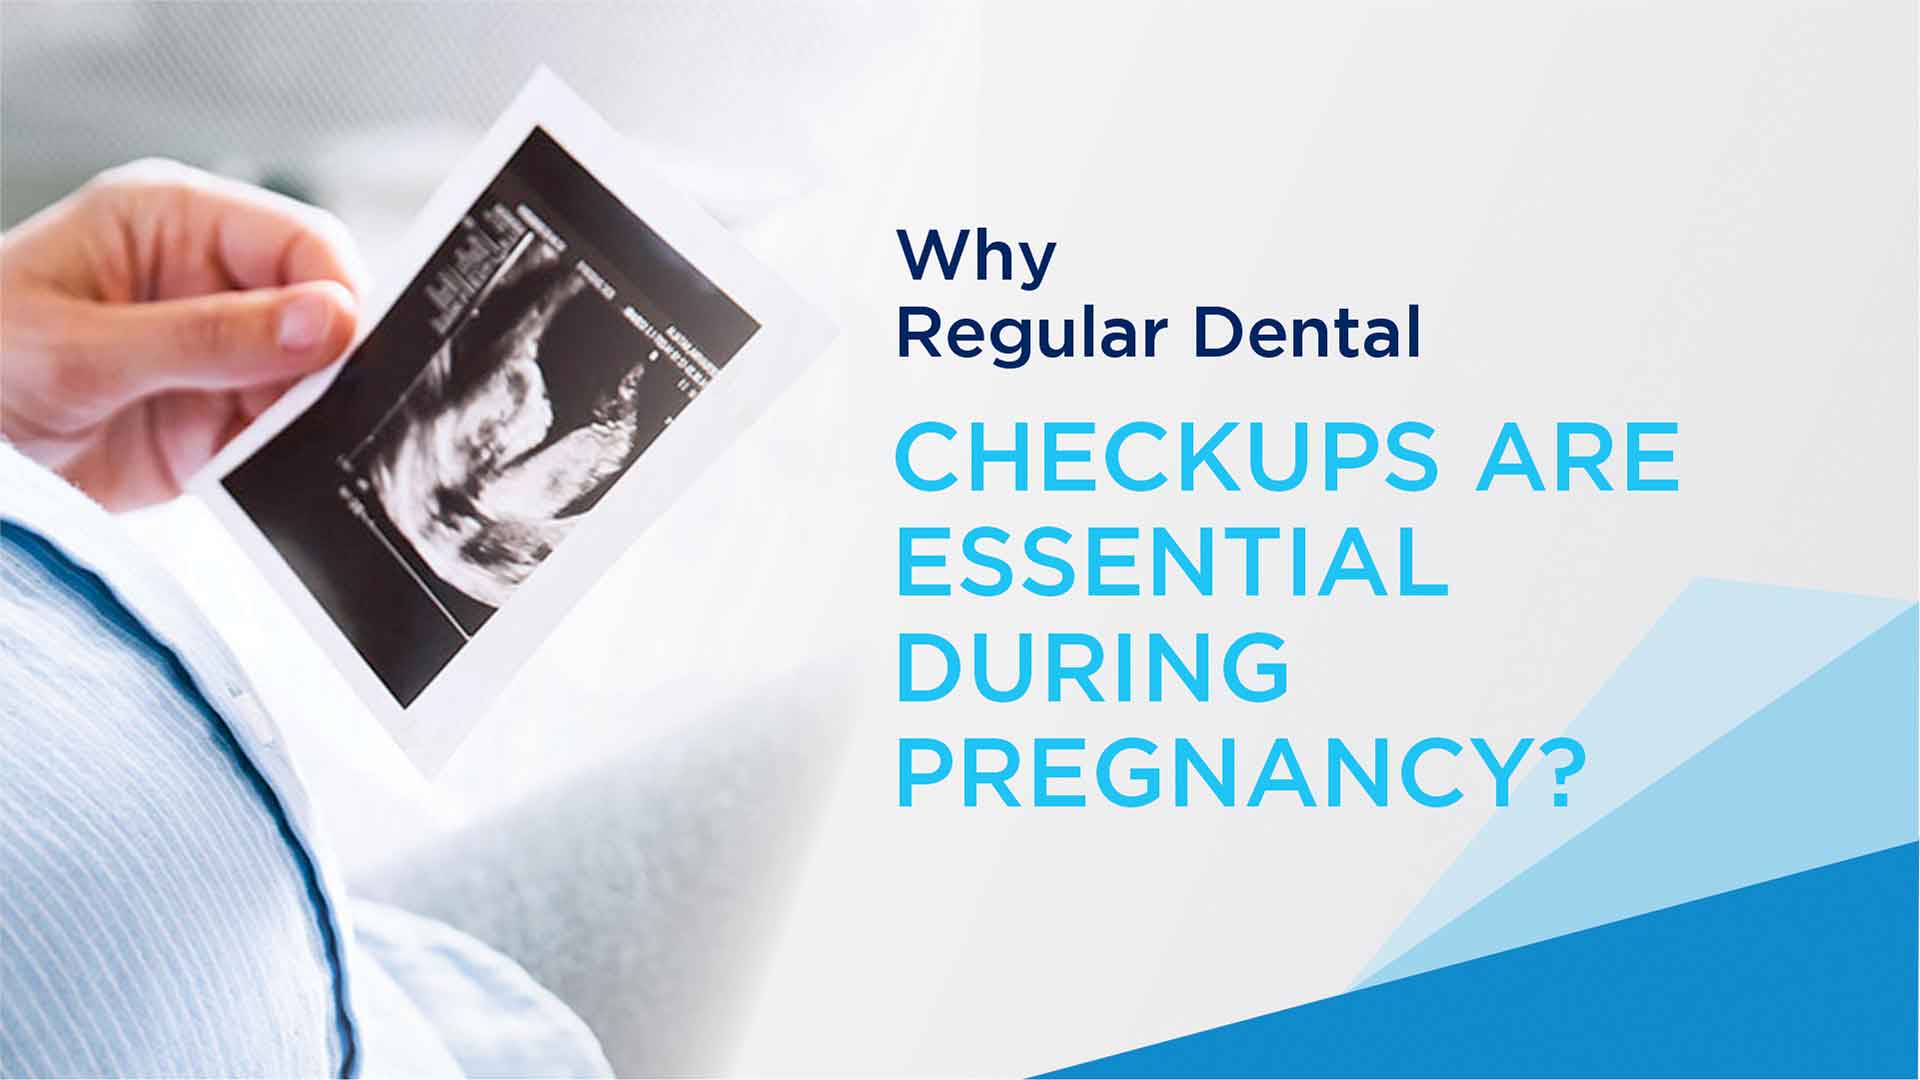 Why Regular Dental Checkups are Essential During Pregnancy